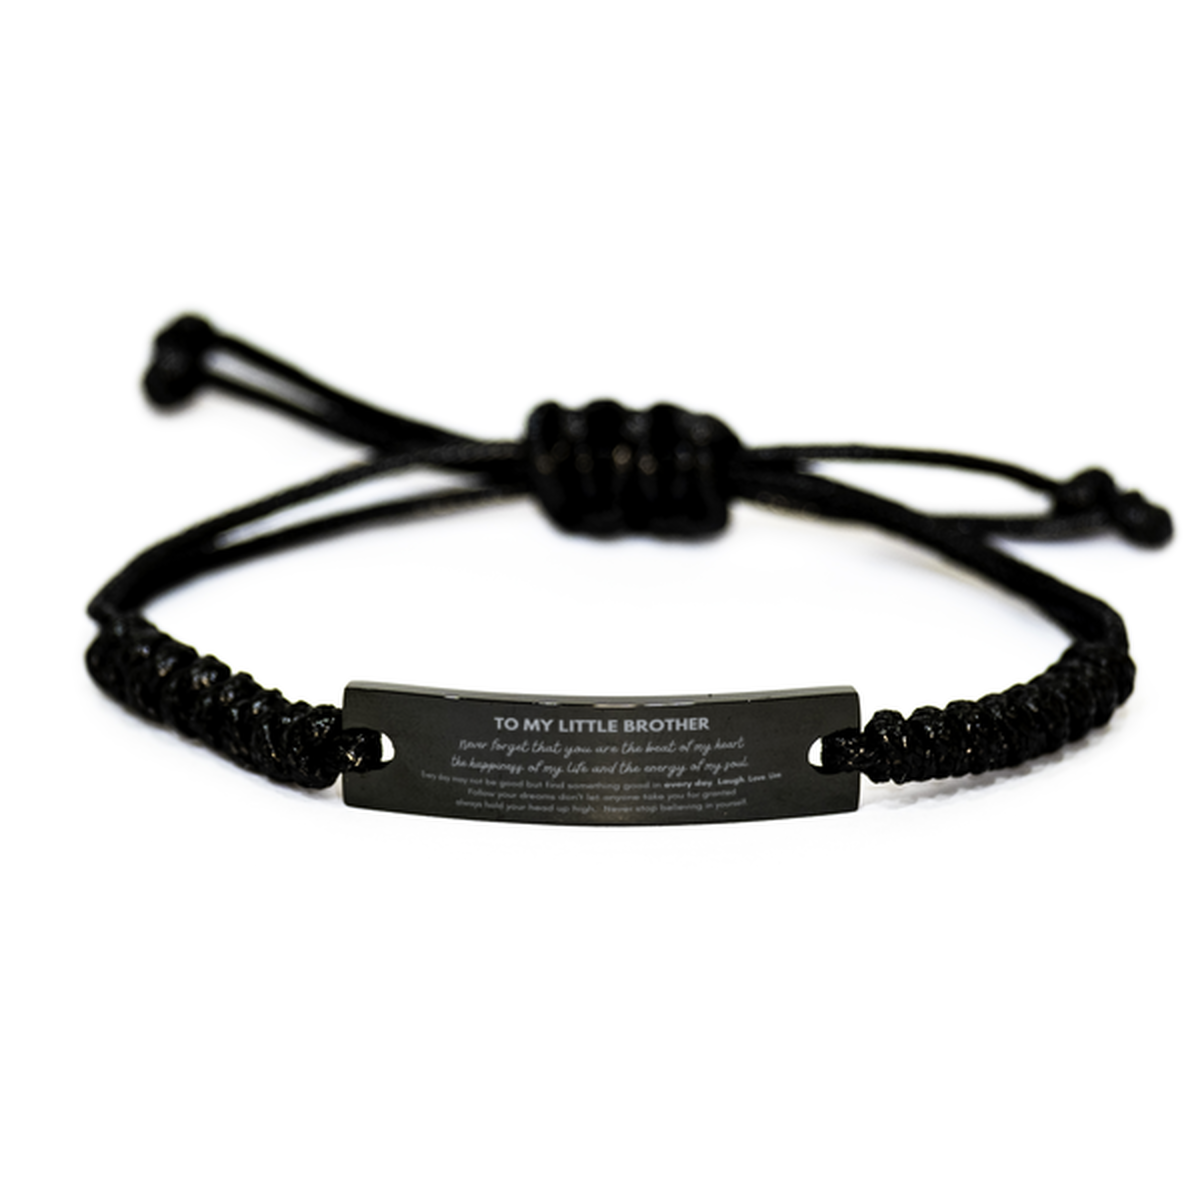 To My Little Brother Bracelet Gifts, Christmas Little Brother Black Rope Bracelet Present, Birthday Unique Motivational For Little Brother, To My Little Brother Never forget that you are the beat of my heart the happiness of my life and the energy of my s